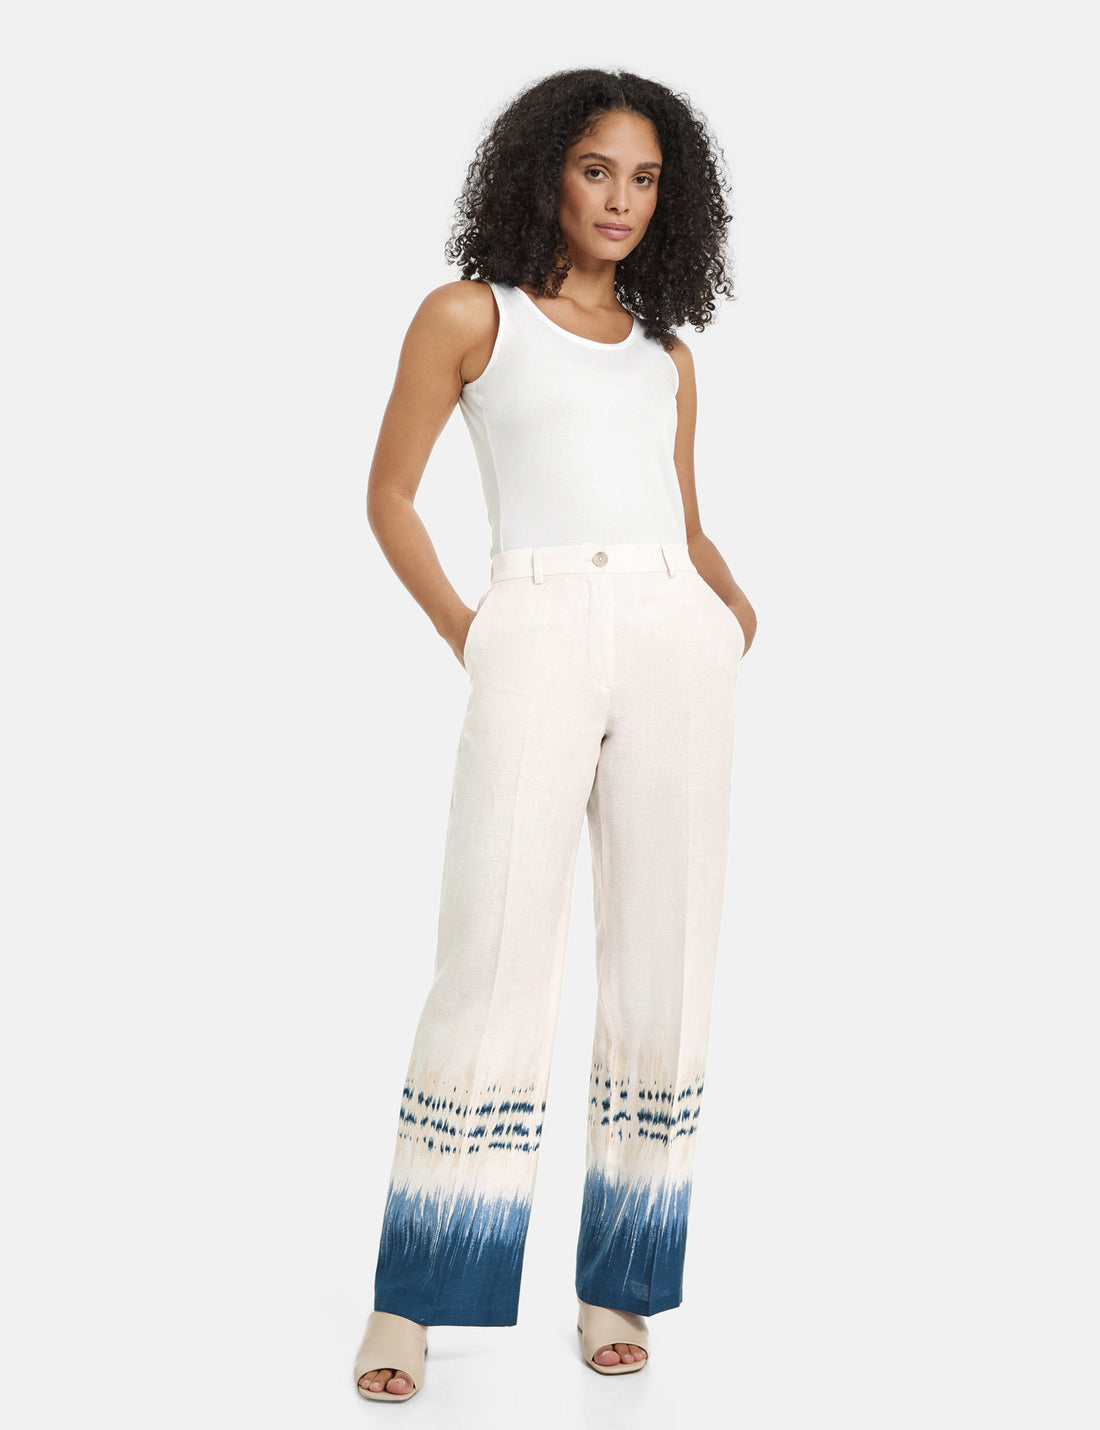 Linen Trousers With A Patterned Hem_320042-31287_3088_01